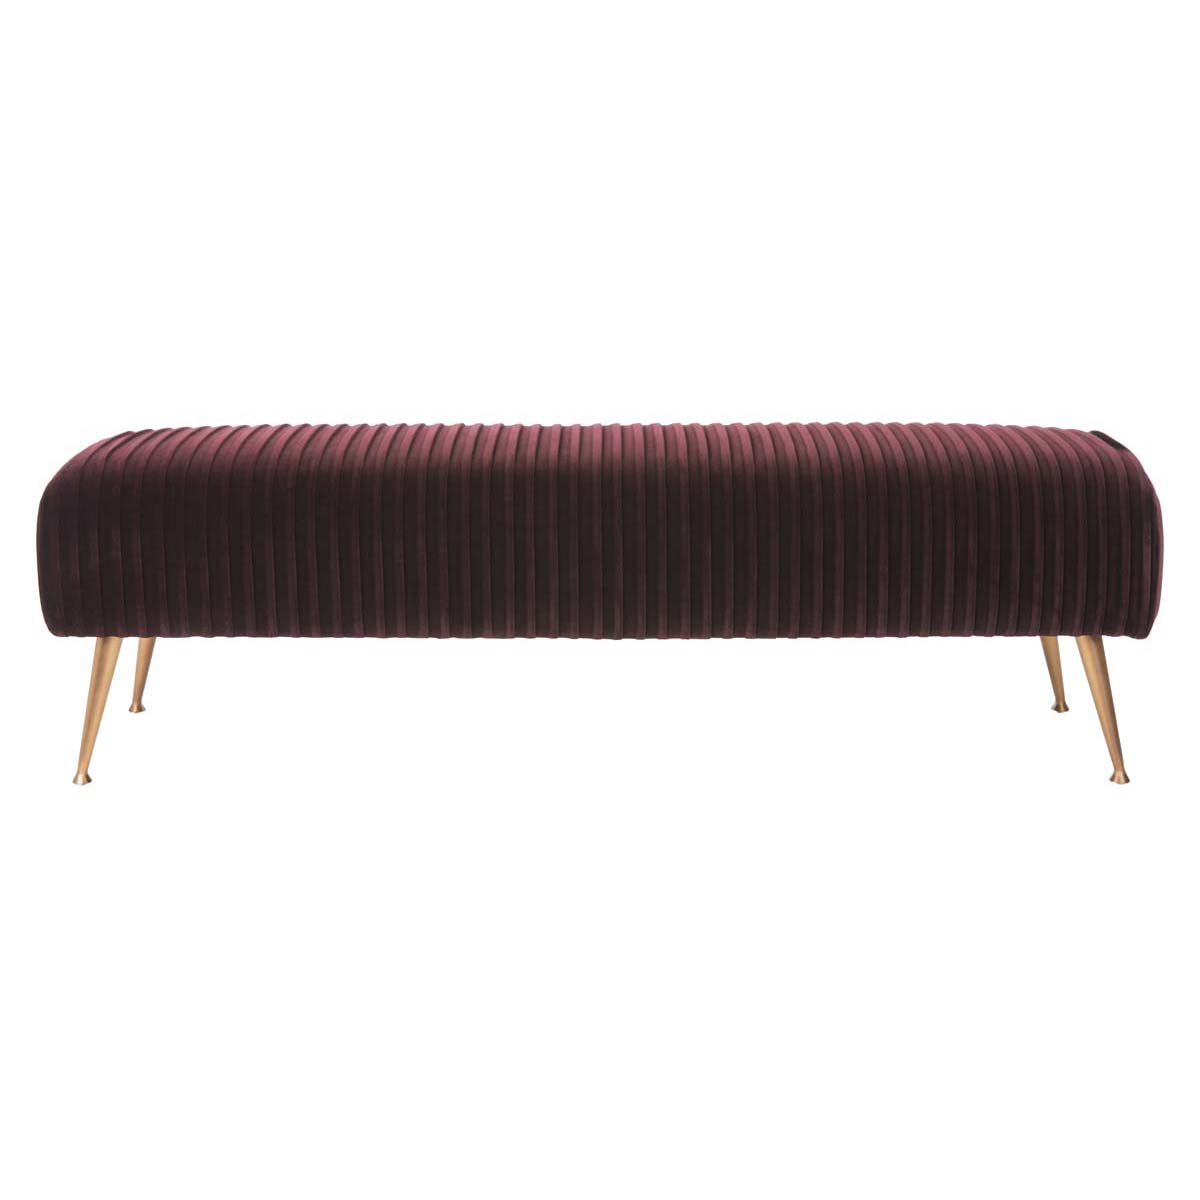 Safavieh Couture Salome Upholstered Bench